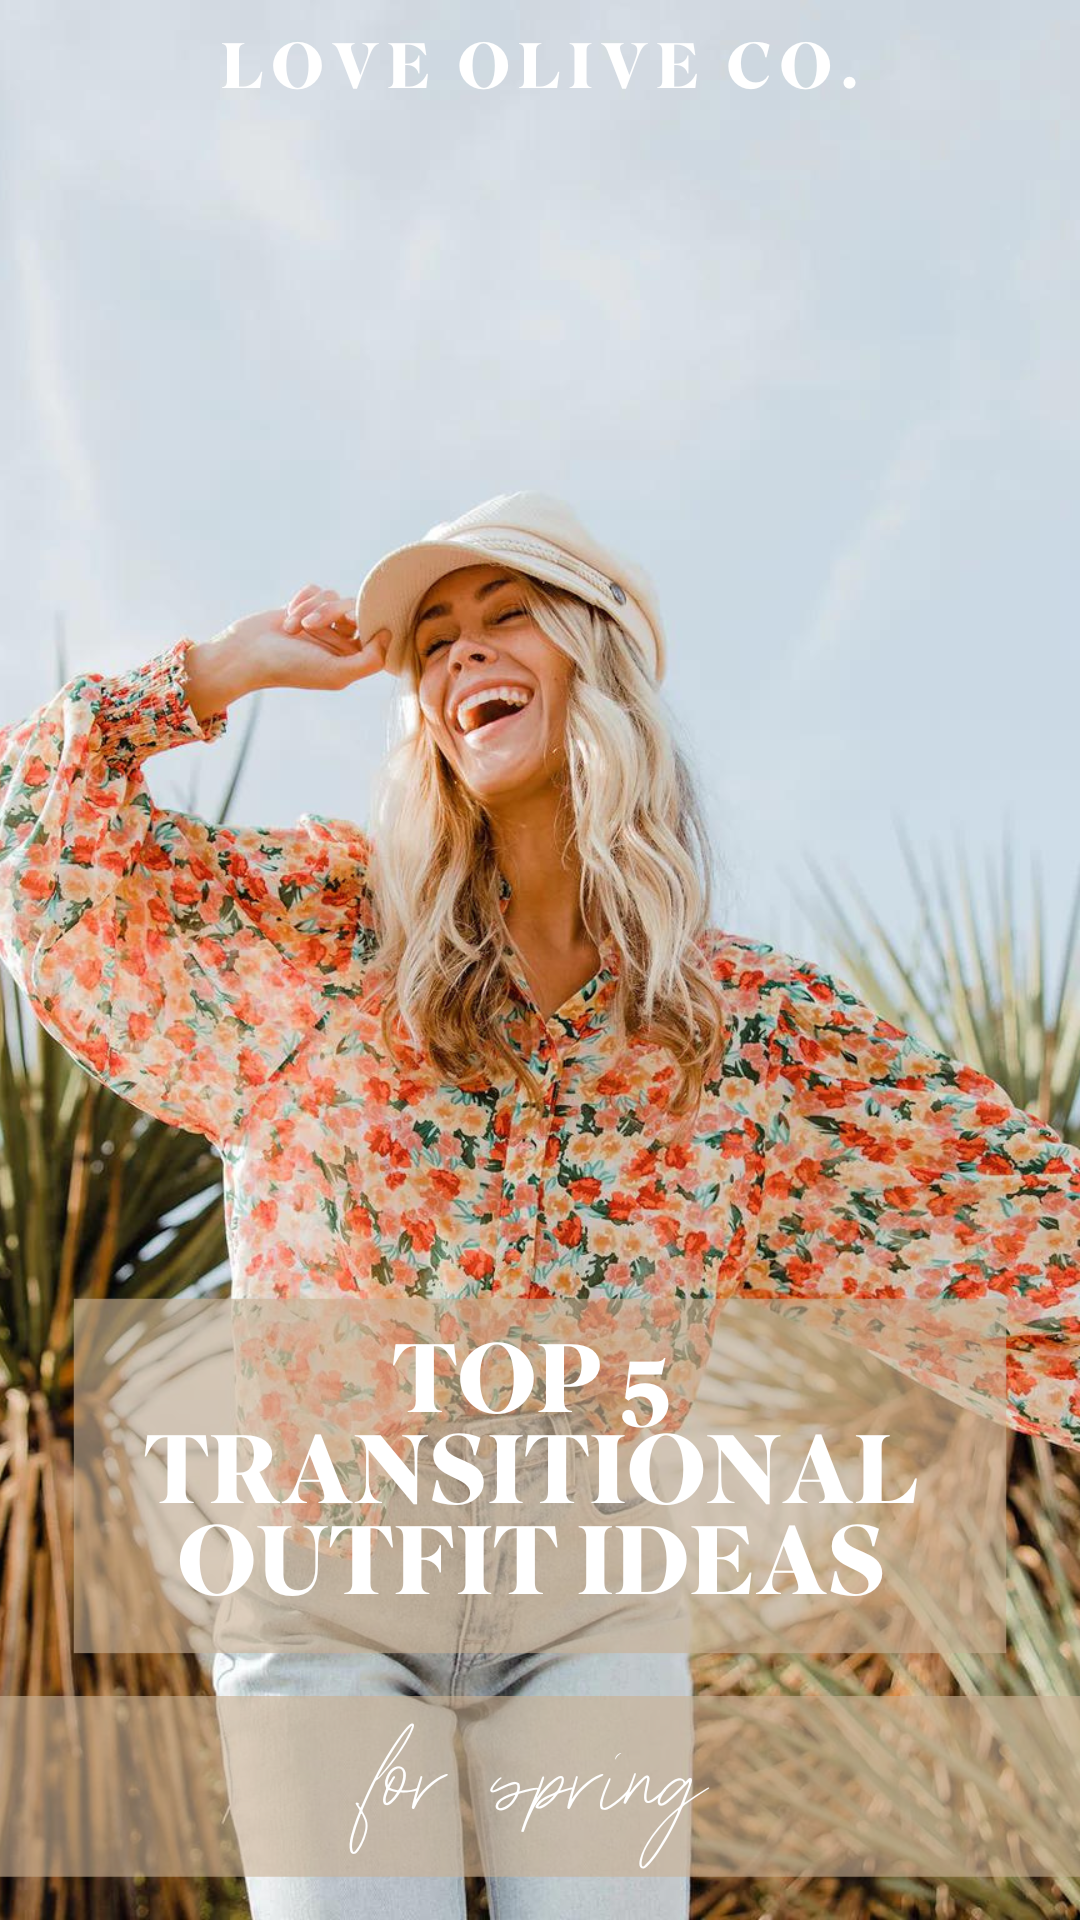 top 5 transitional outfit ideas for spring. www.www.loveoliveshop.com